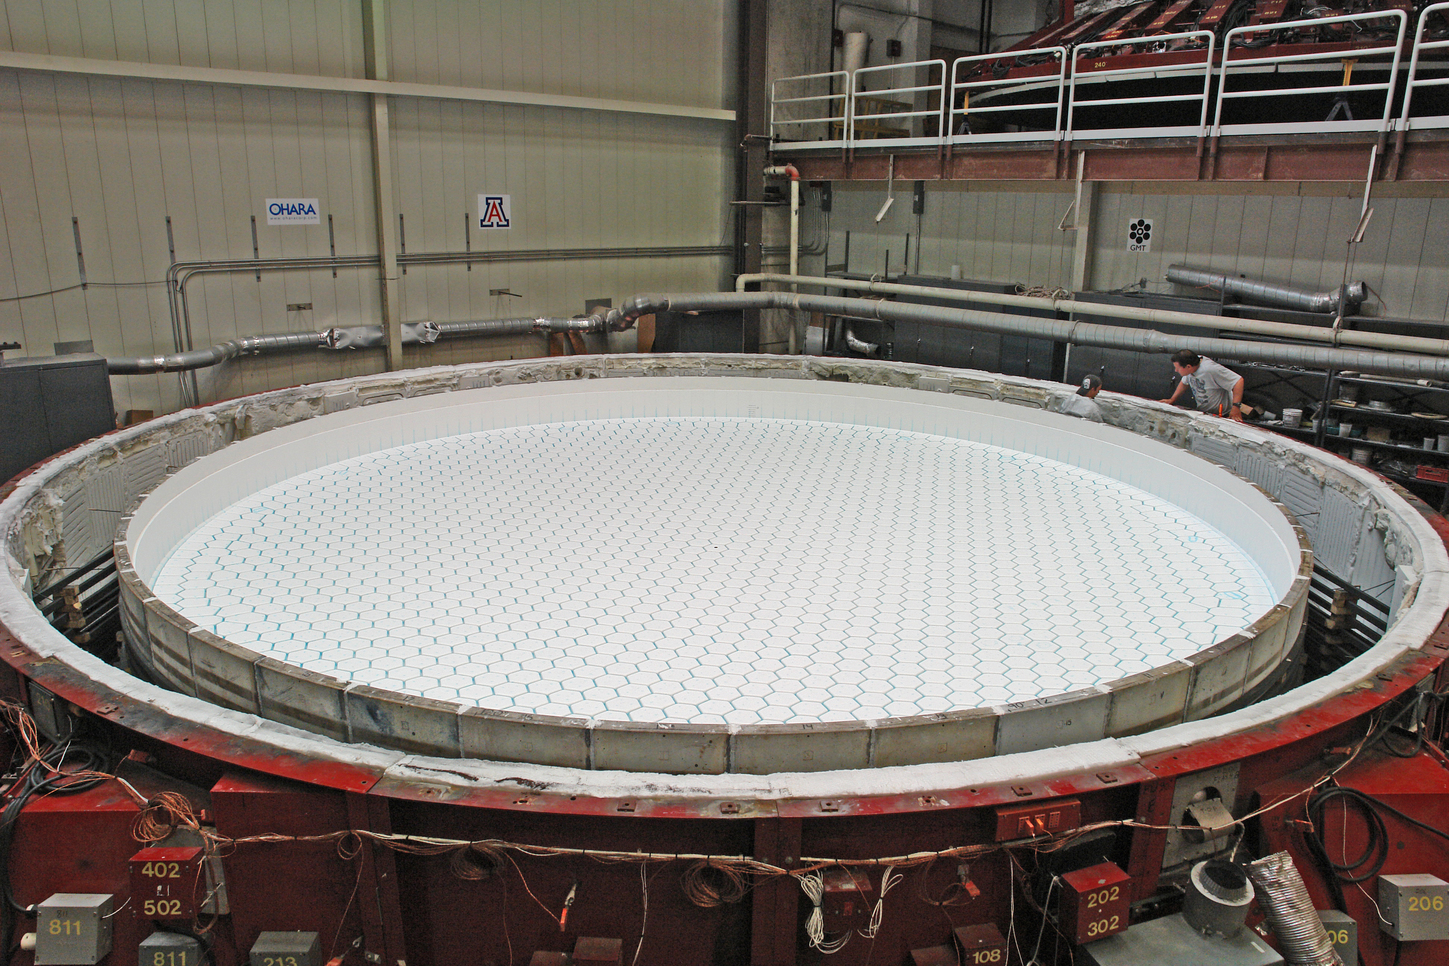 Mold for casting an 8.4-meter honeycomb mirror for the GMT. The glass will melt around the hexagonal boxes to form the honeycomb. (Ray Bertram—Steward Observatory)